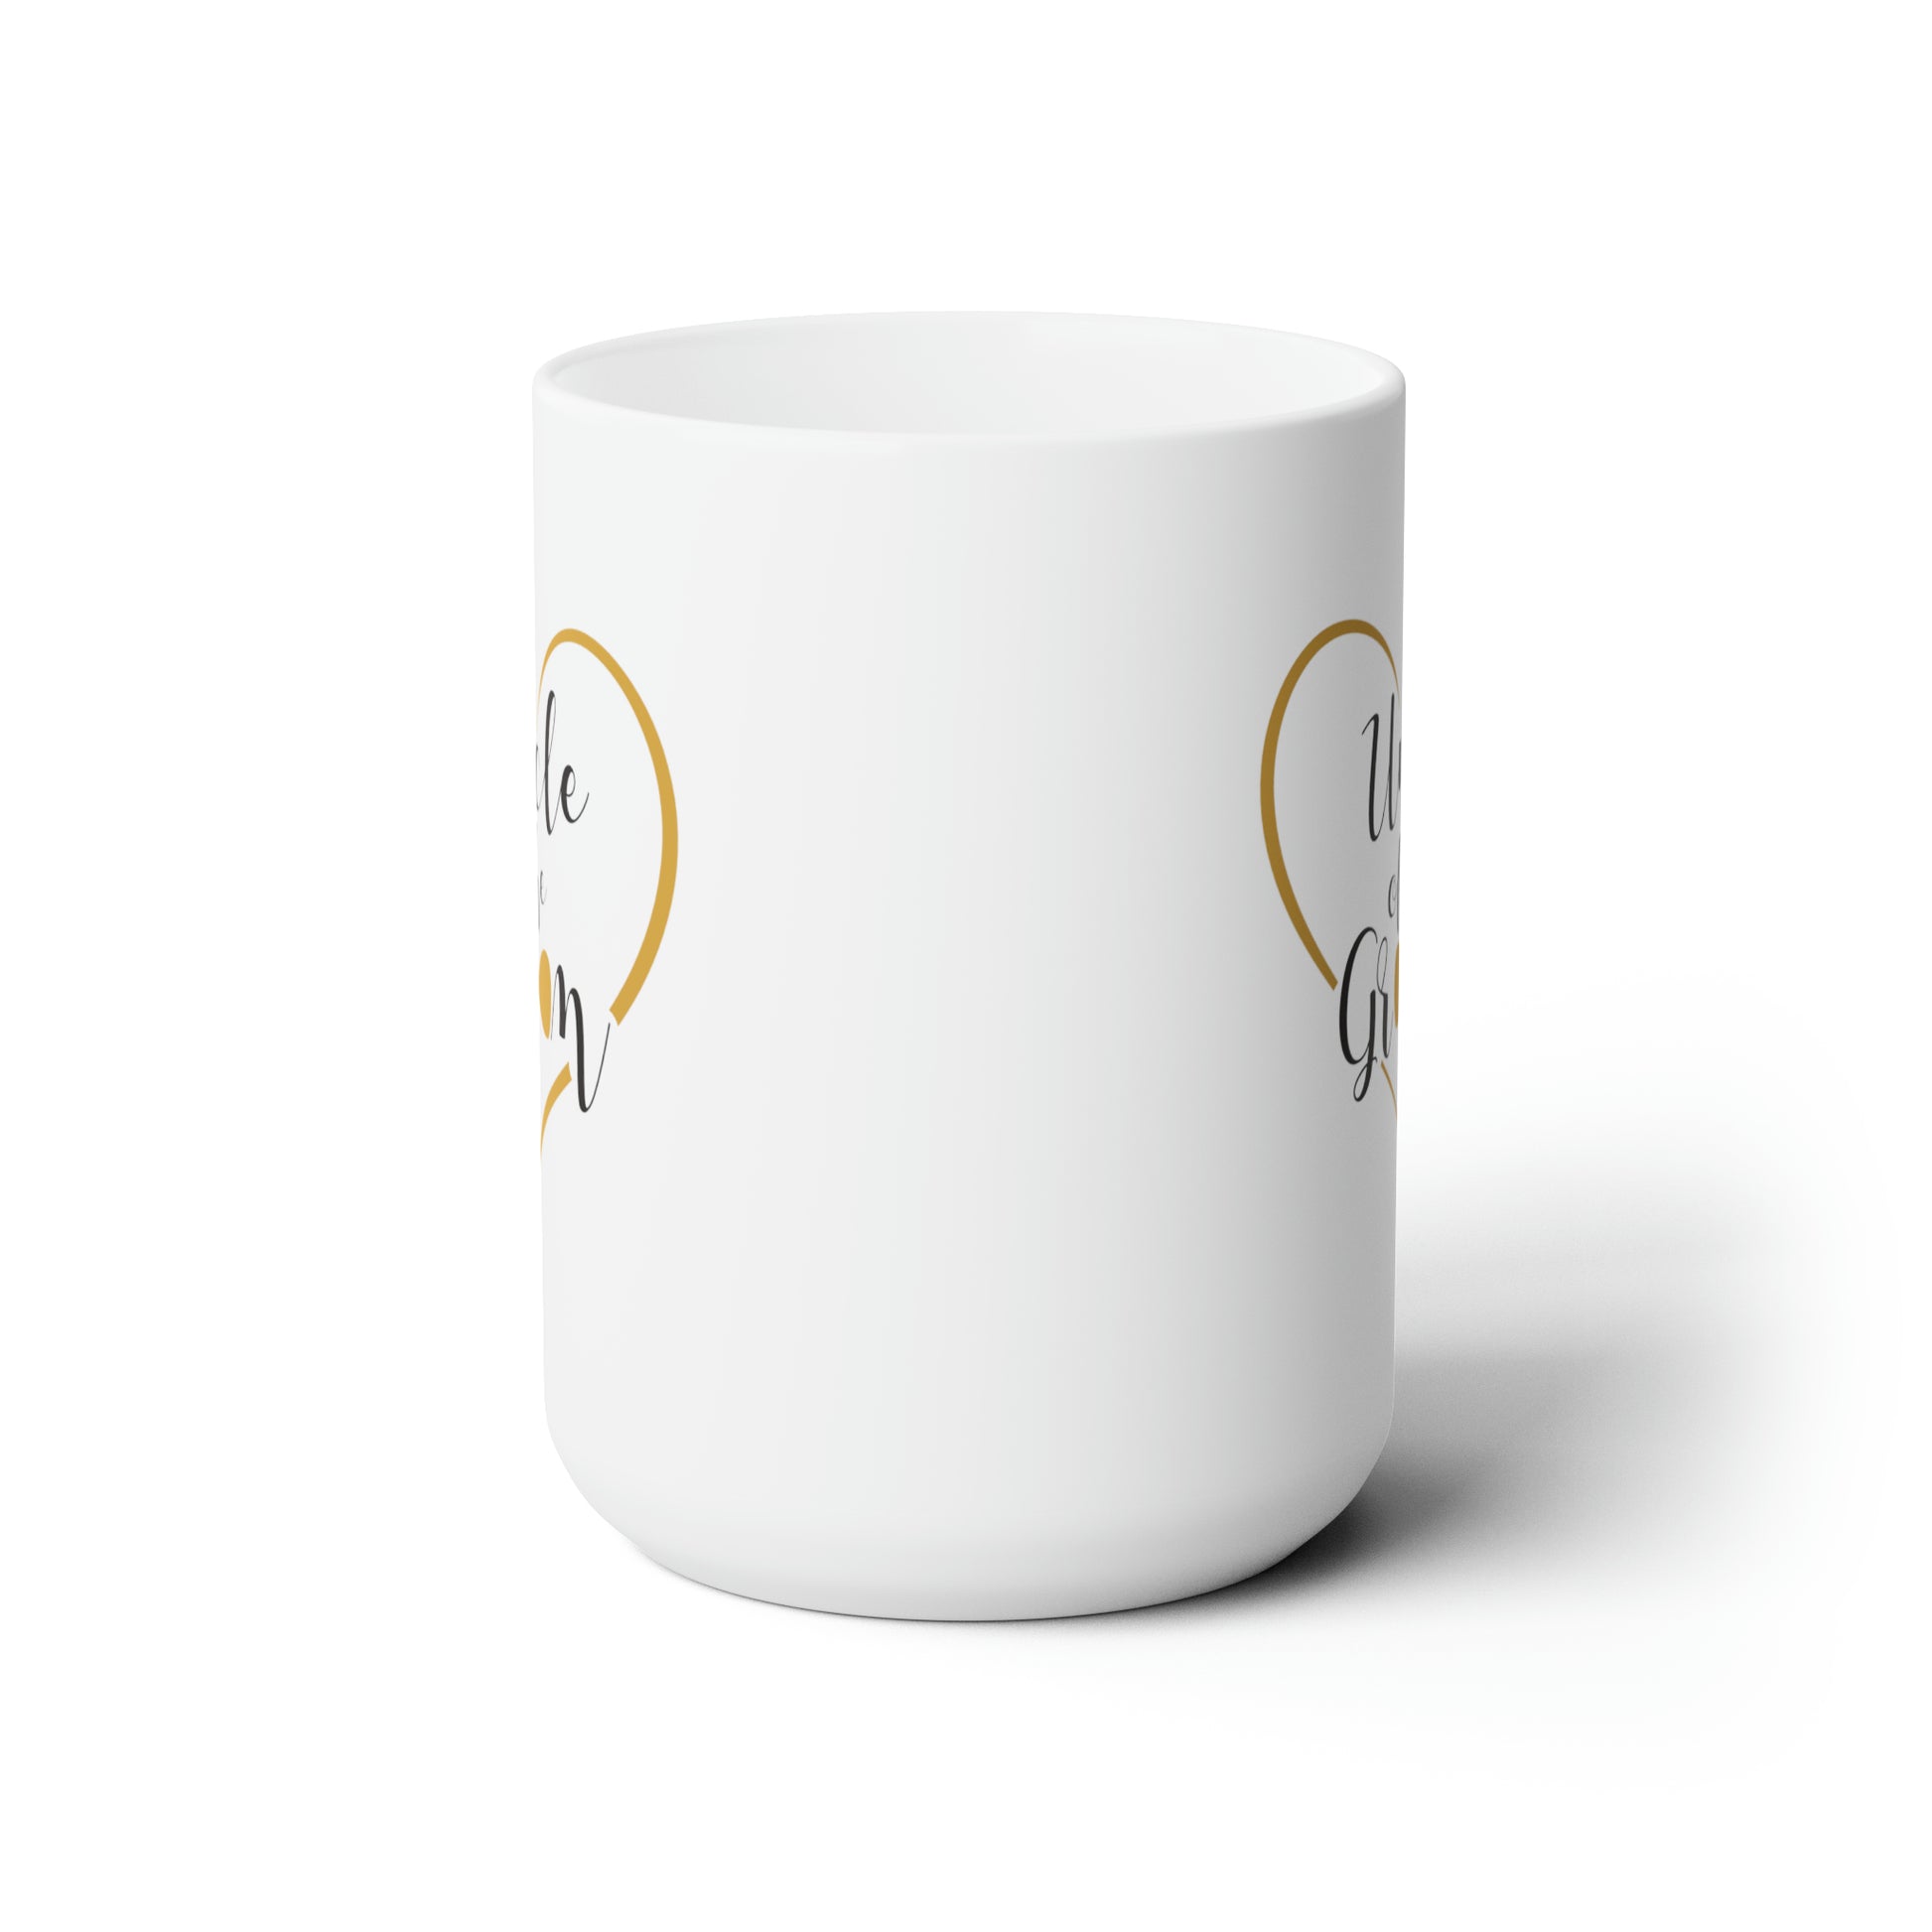 This listing is for a Premium Quality 15oz White Ceramic Coffee Mug with a double sided Uncle of the Groom design